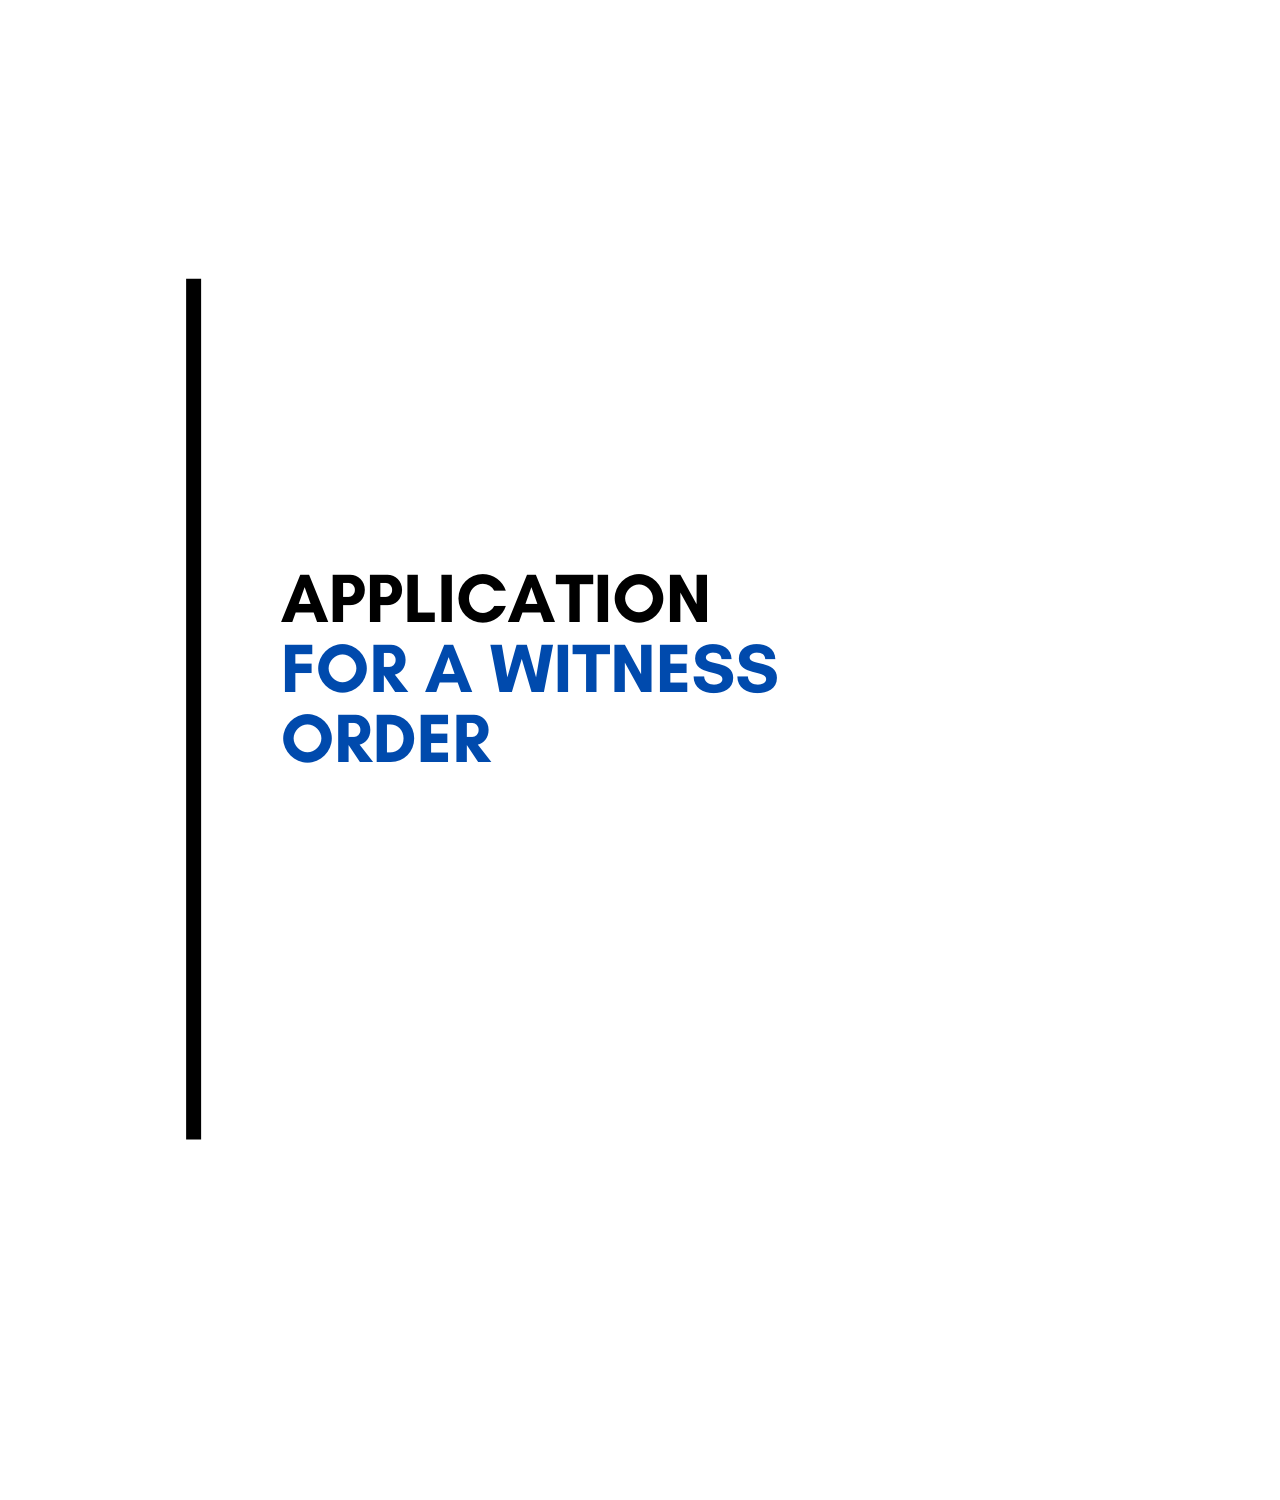 Application for a Witness Order